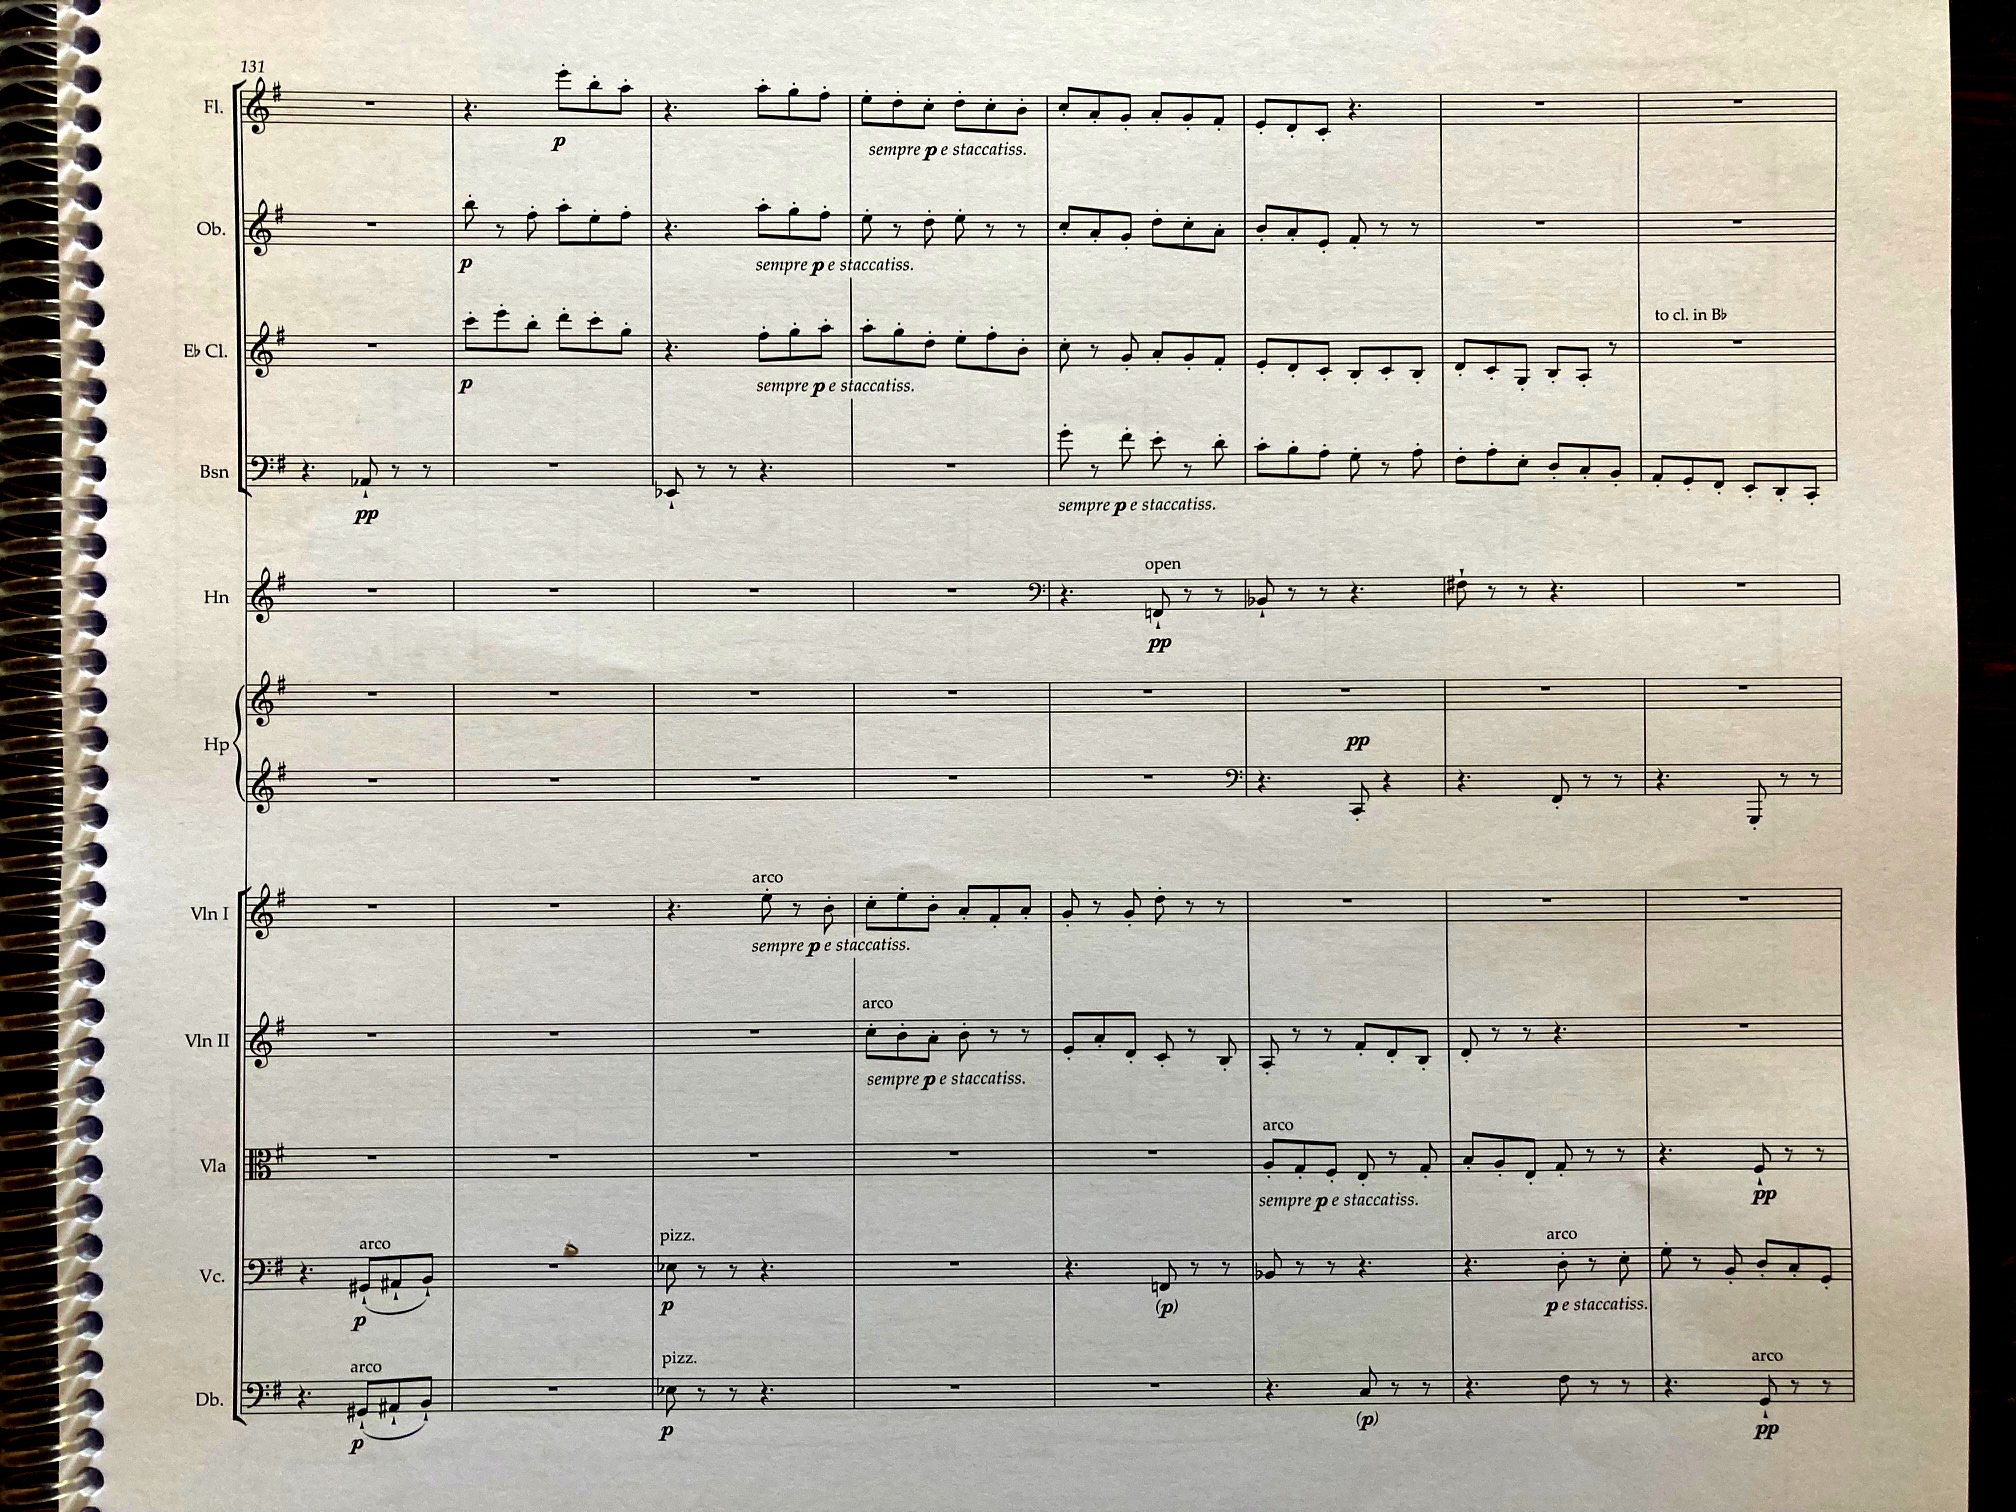 Joseph Phibbs' score for 'Our Hunting Fathers'